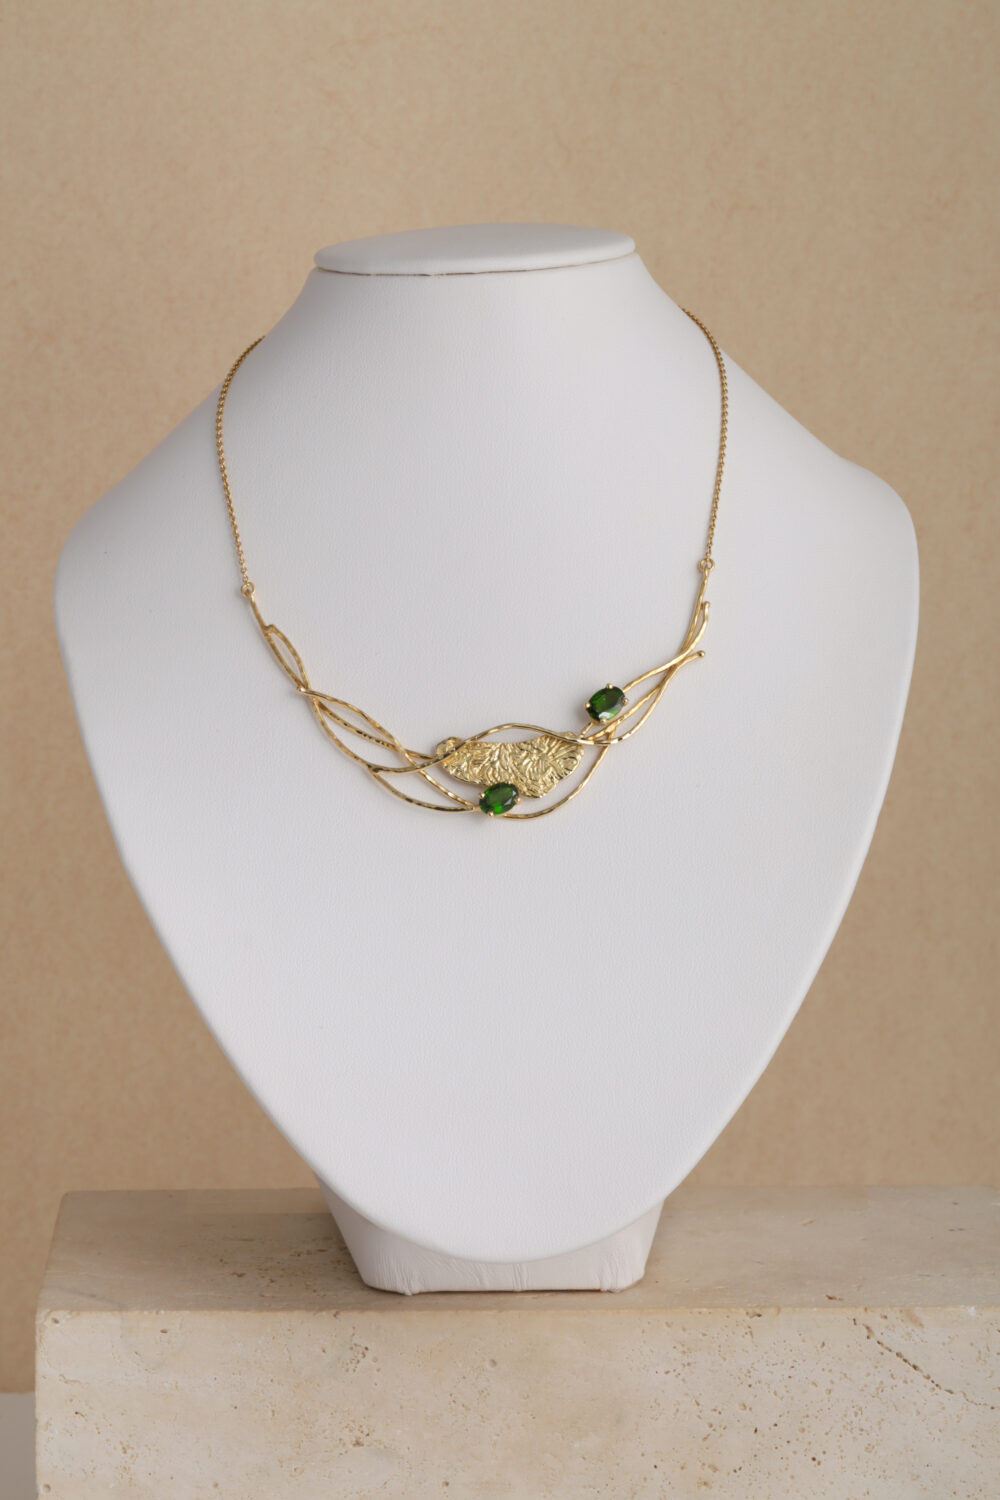 Necklace crafted from 18-karat yellow gold set with two oval cut green Diopsite gemstones.